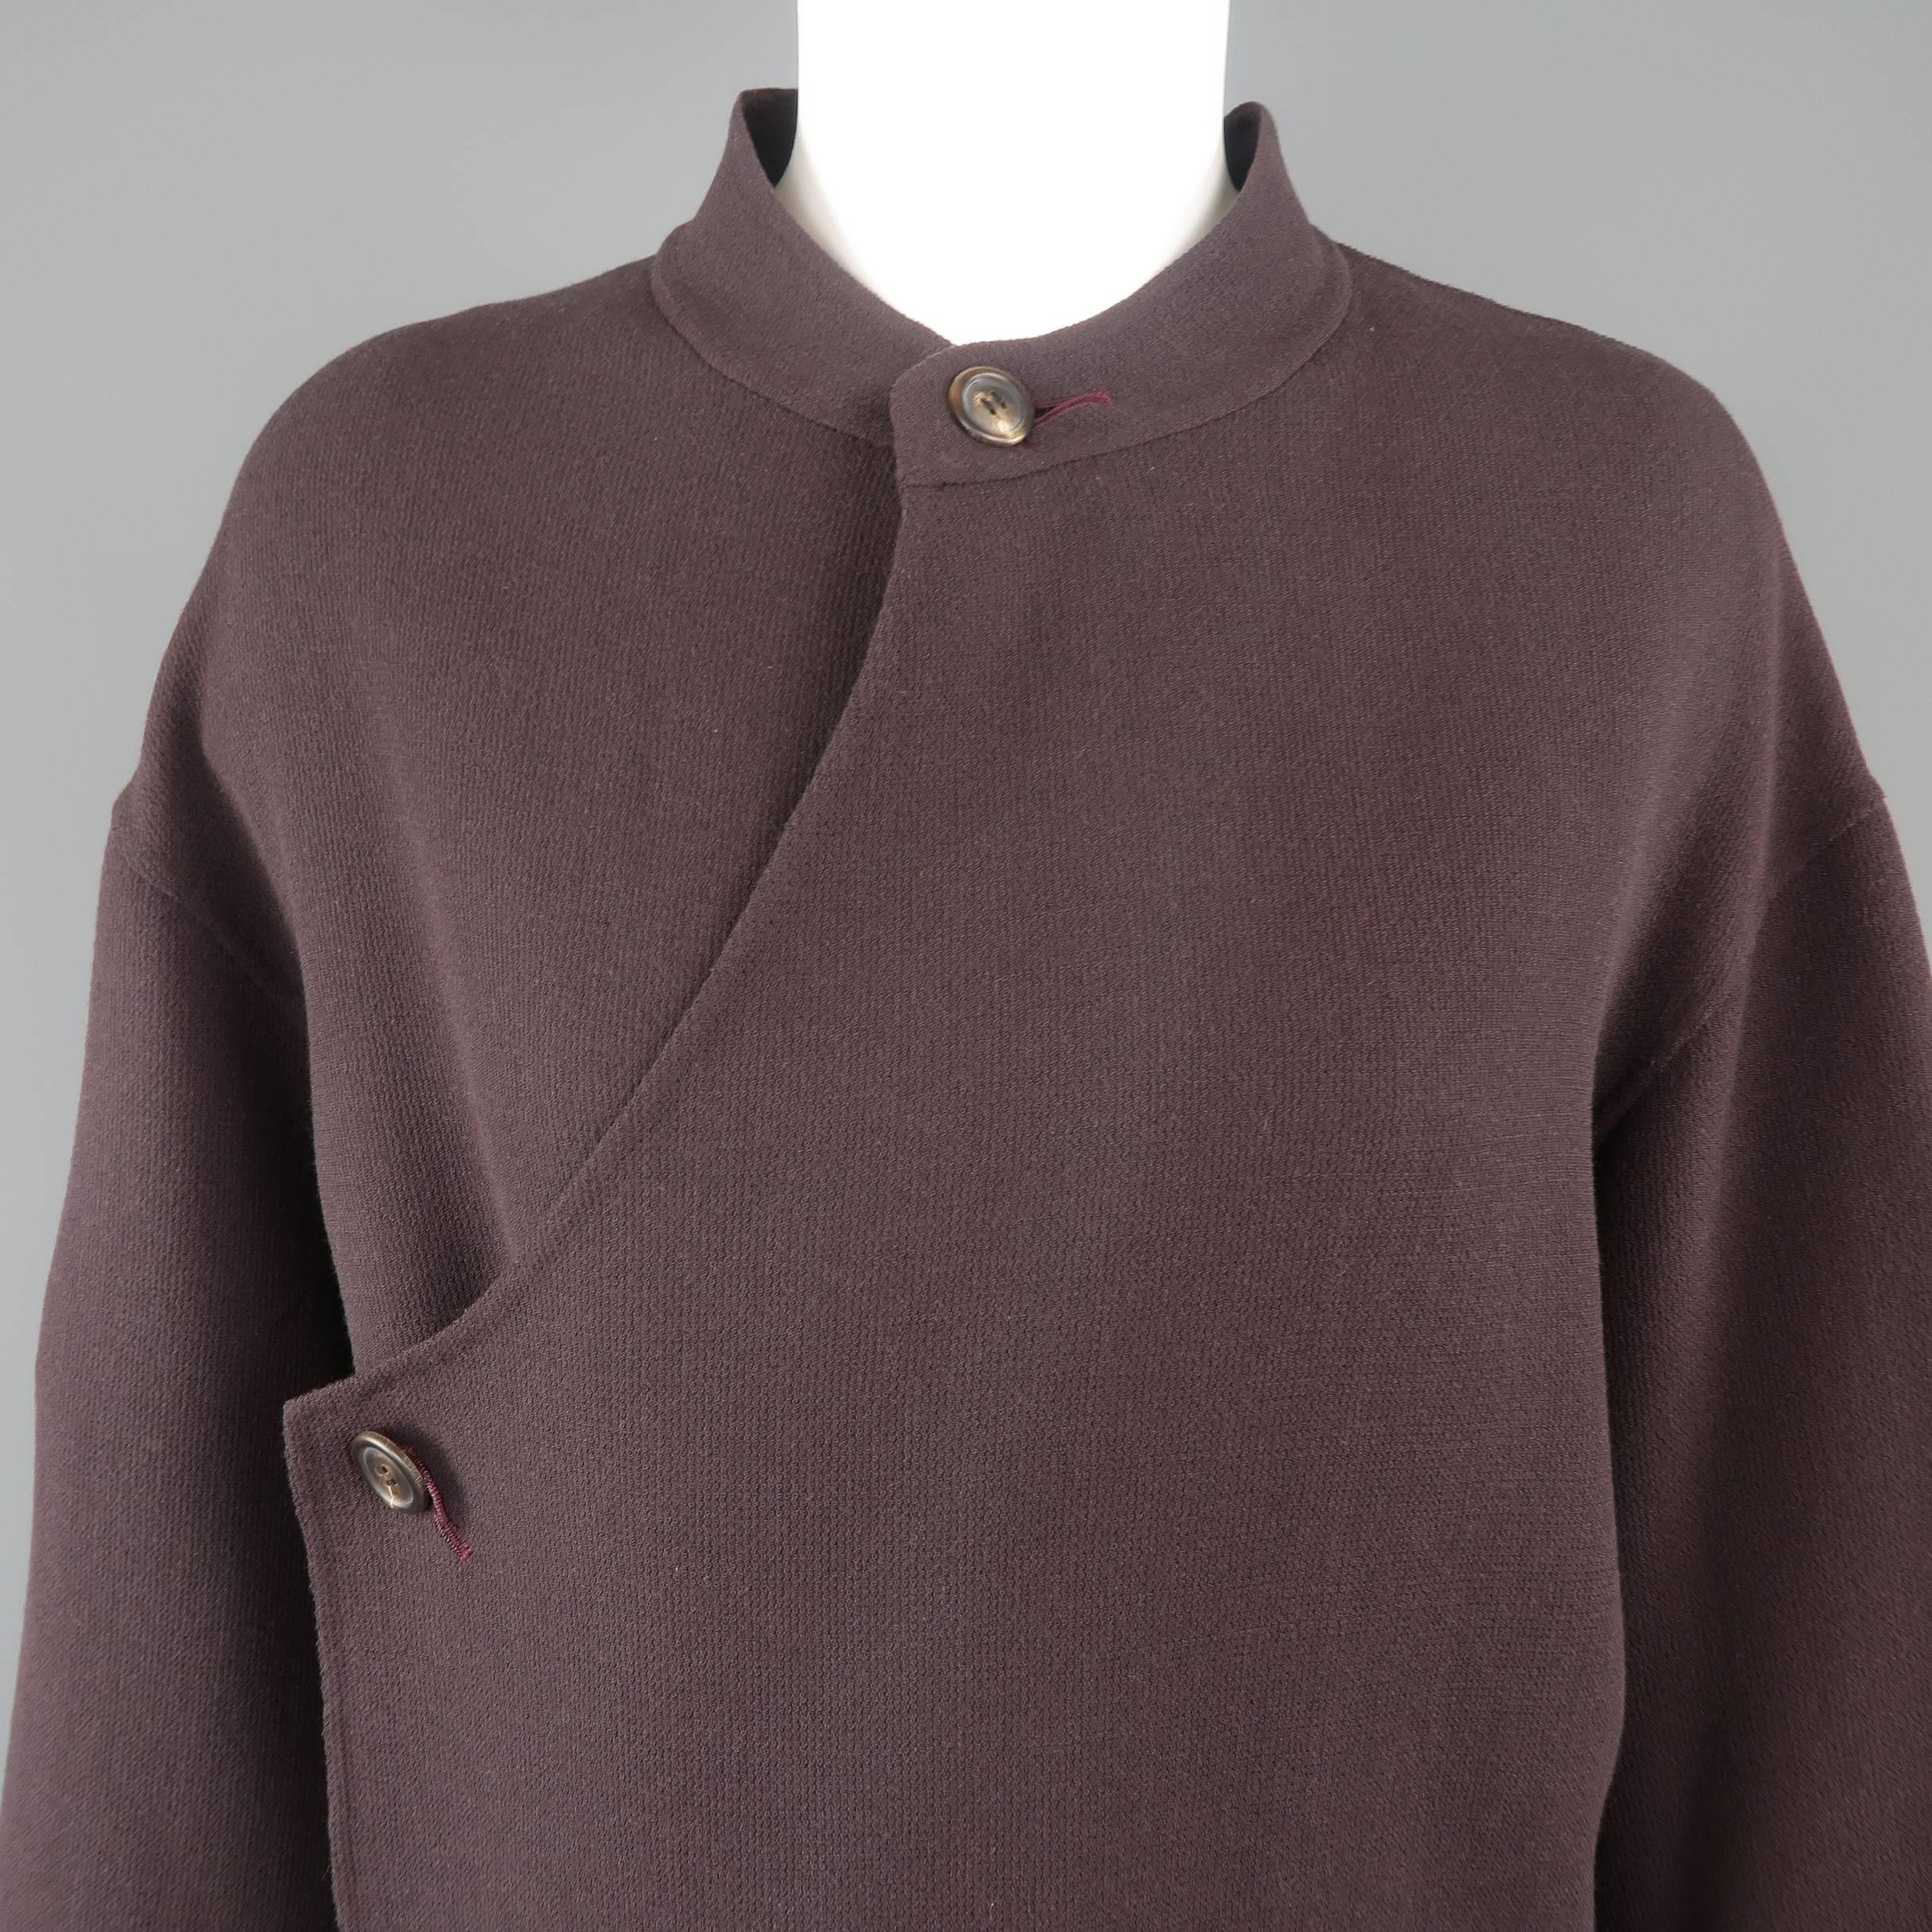 Vintage ISSEY MIYAKE coat comes in plum purple textured wool crepe with a band collar, asymmetrical double breasted closure, and slip pockets with buttons. Made in Japan.
 
Excellent Pre-Owned Condition.
Marked: L
 
Measurements:
 
Shoulder: 22